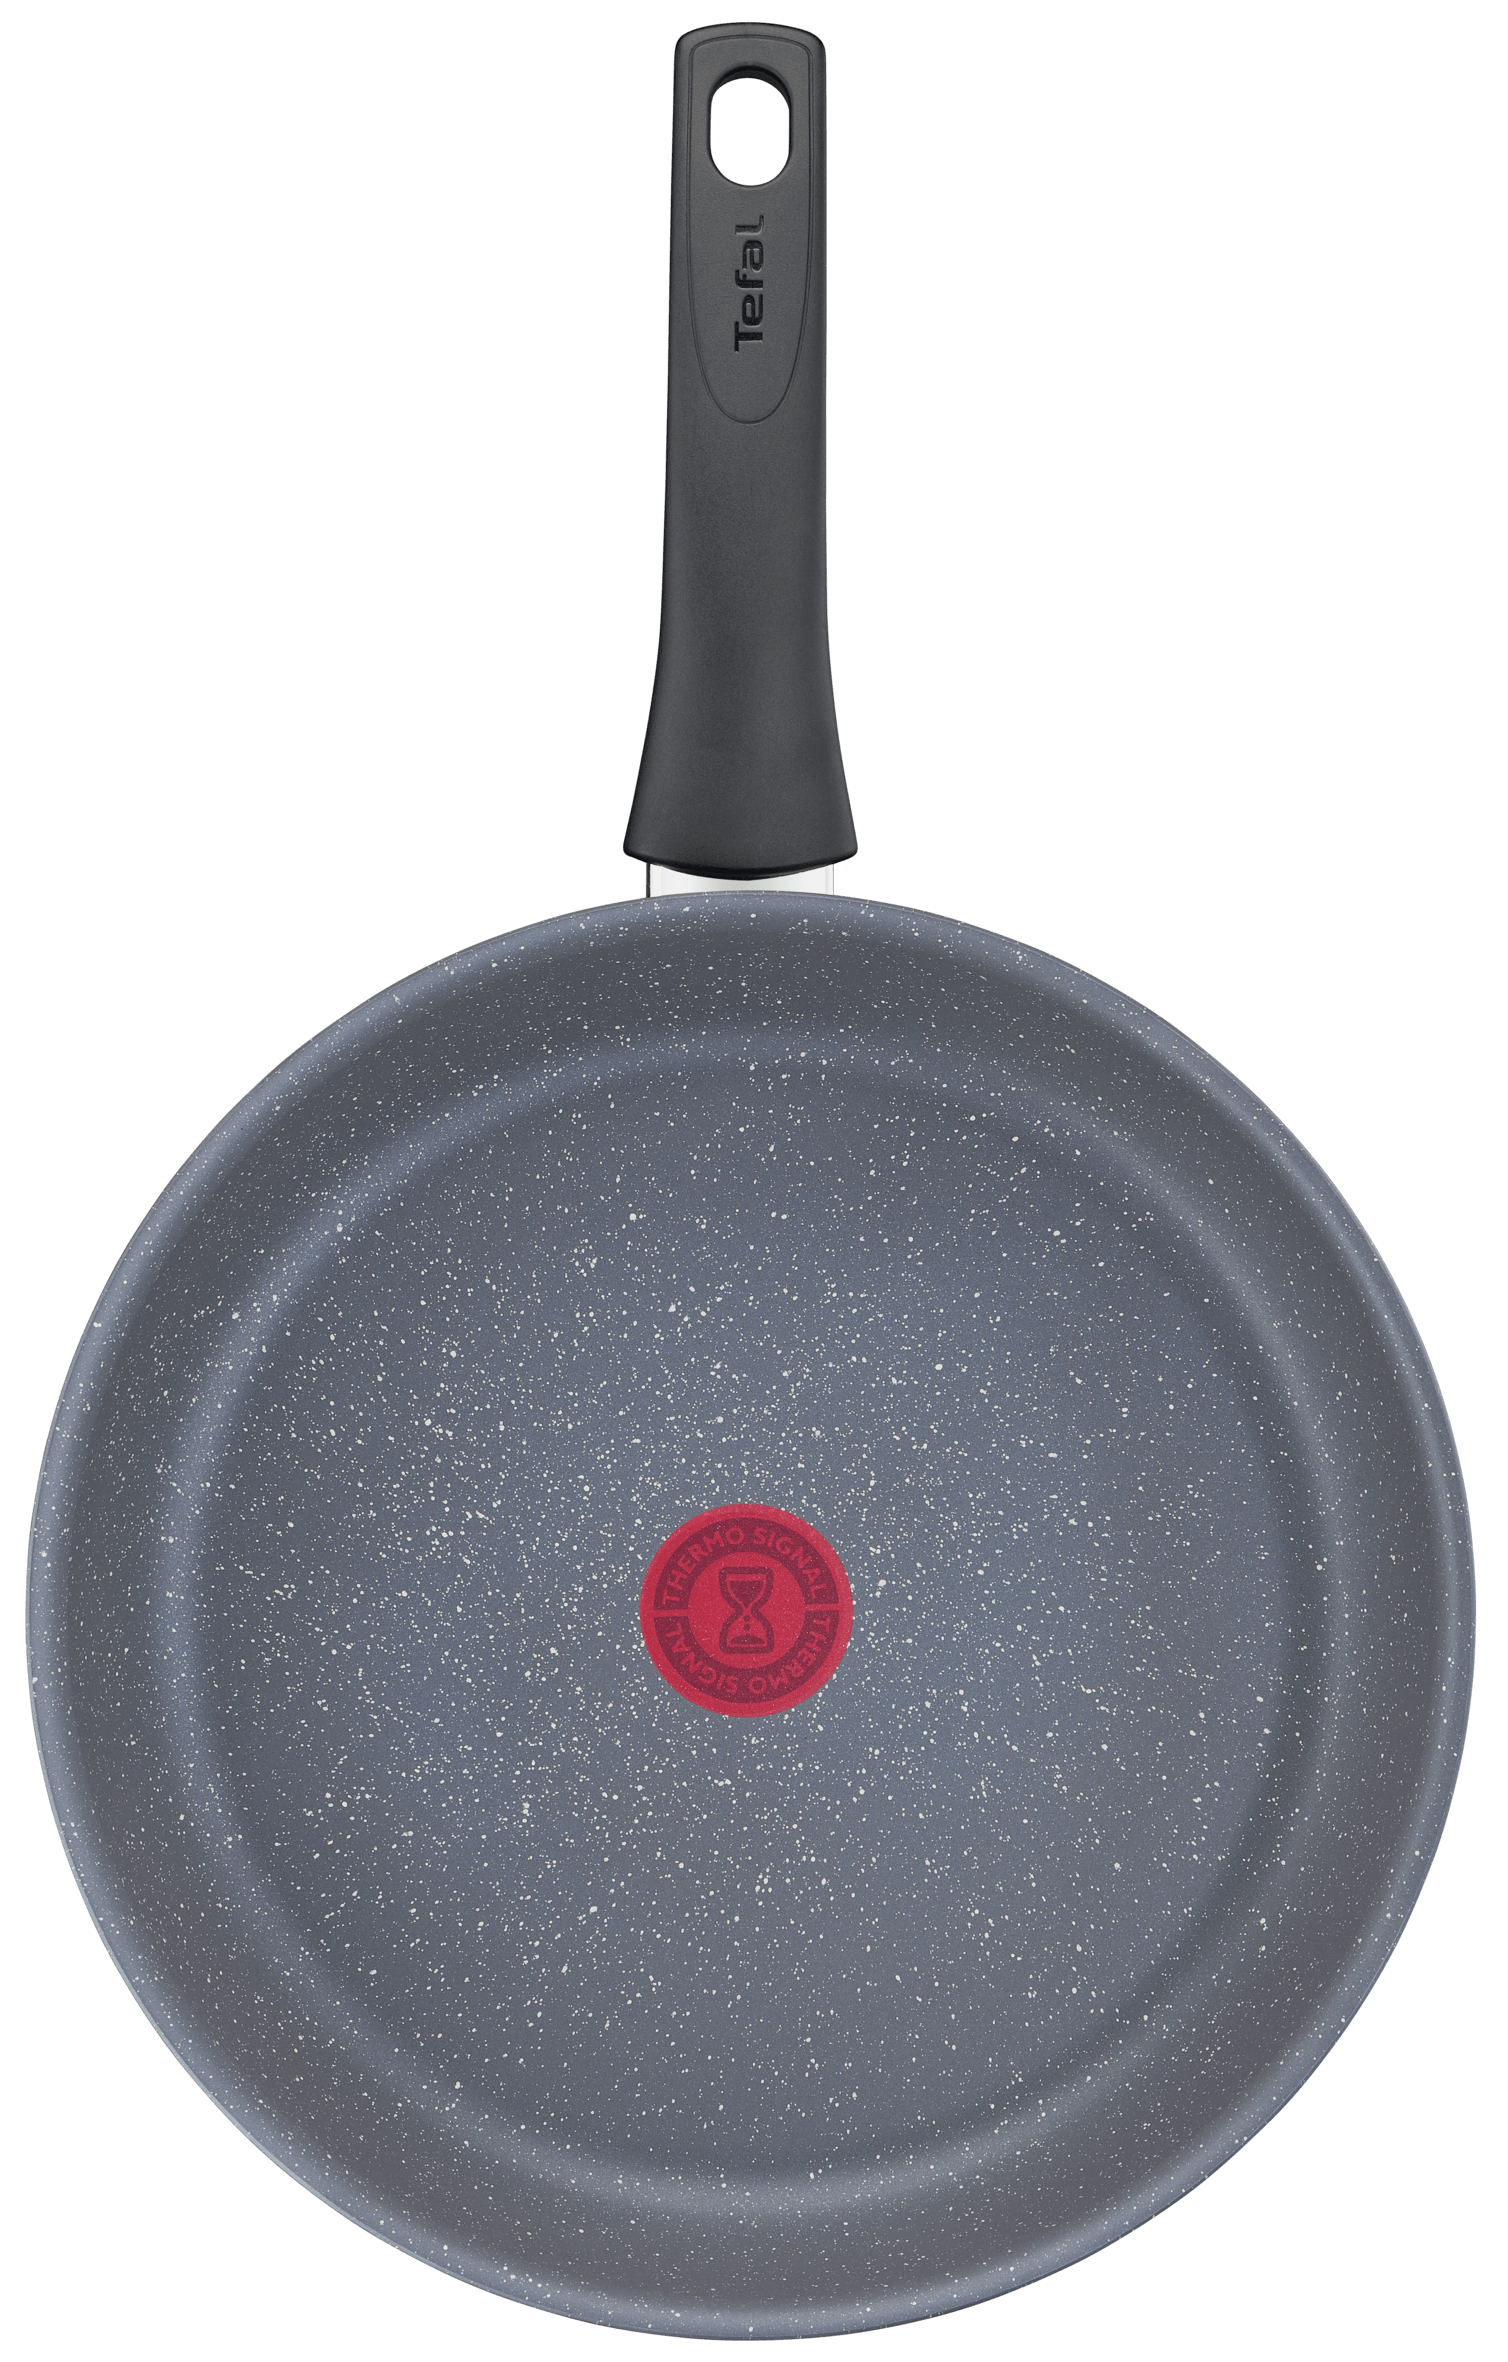 Tefal Healthy Chef Non-Stick Induction Frypan 28cm